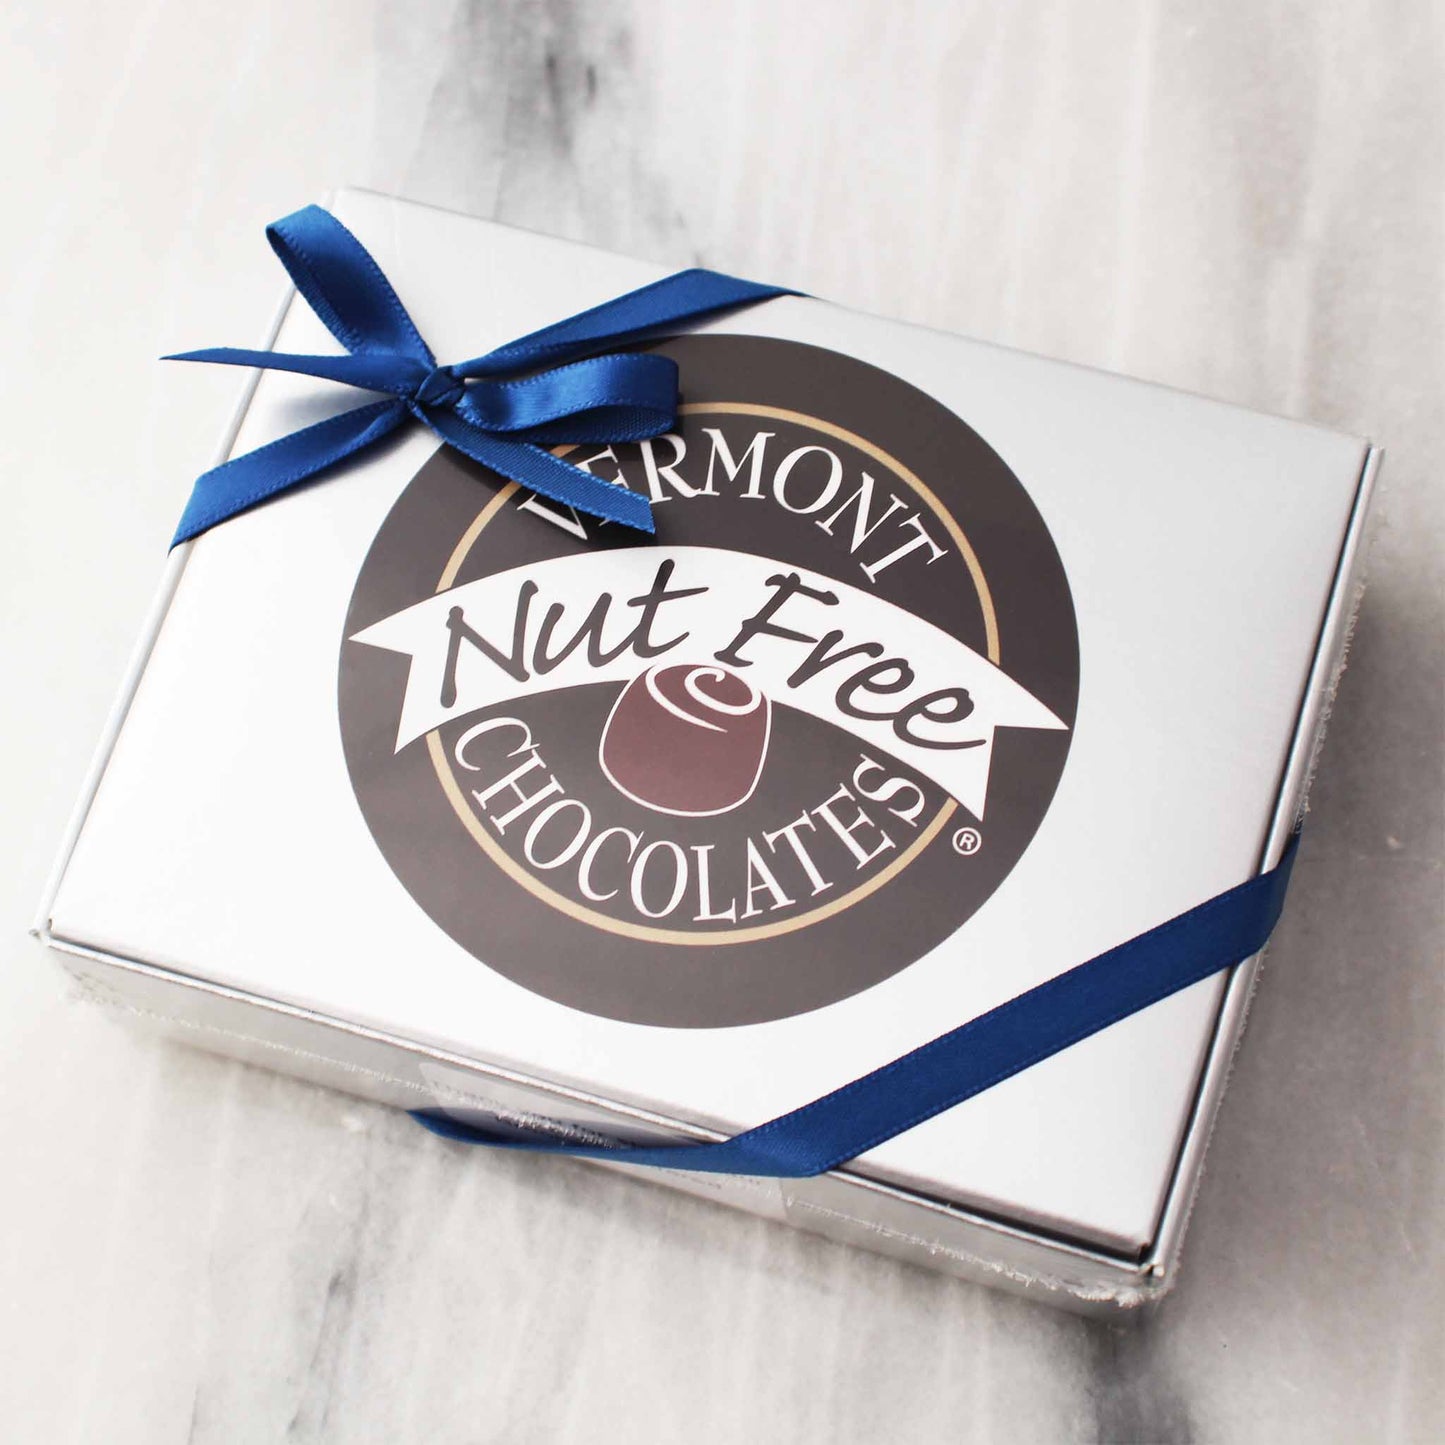 Silver box with a blue ribbon. Big circular logo on the front of the box that reads, "Vermont Nut Free Chocolates"